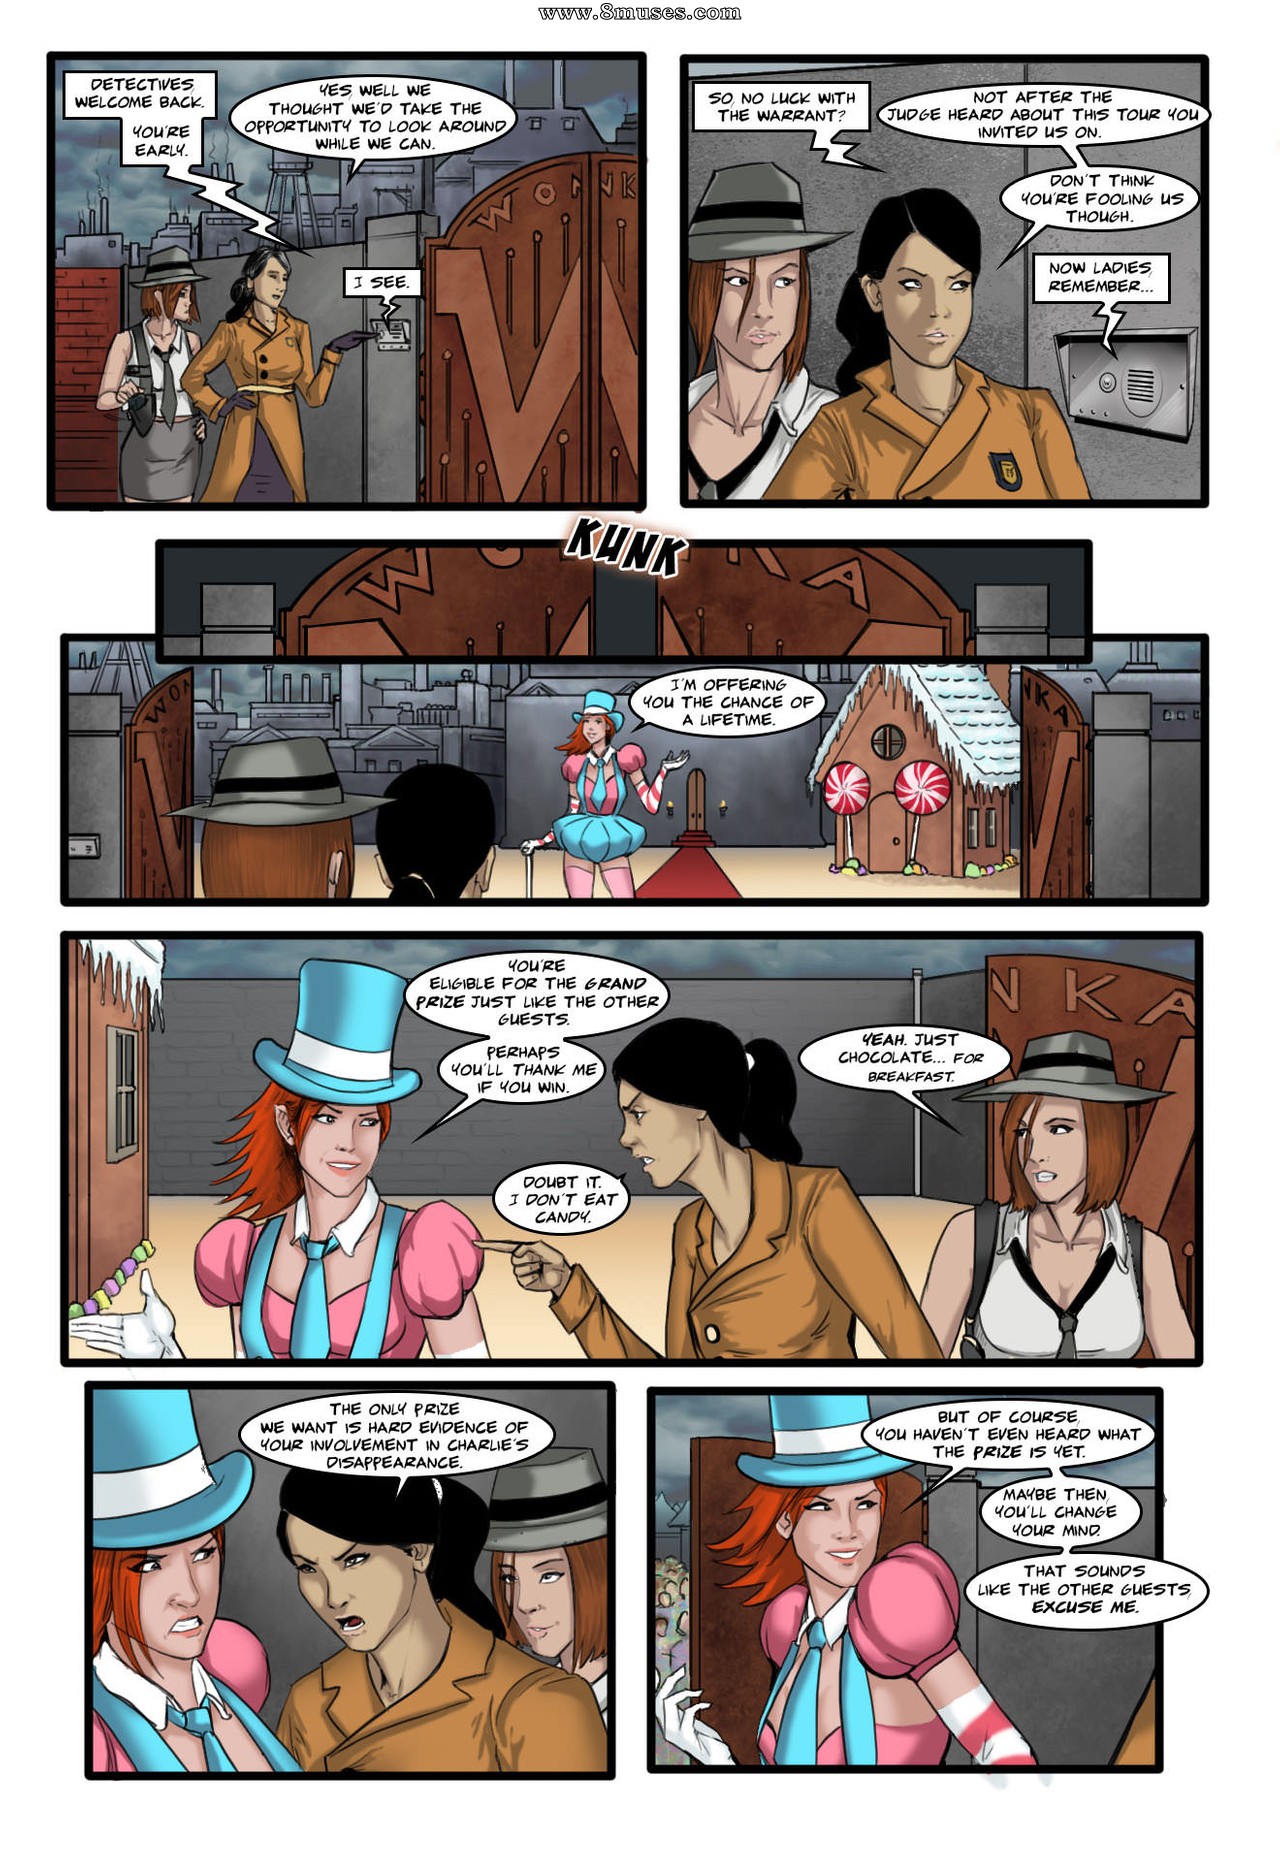 Wendy Wonka and The Chocolate Fetish Factory - 8muses Comics- Free Sex Comi...